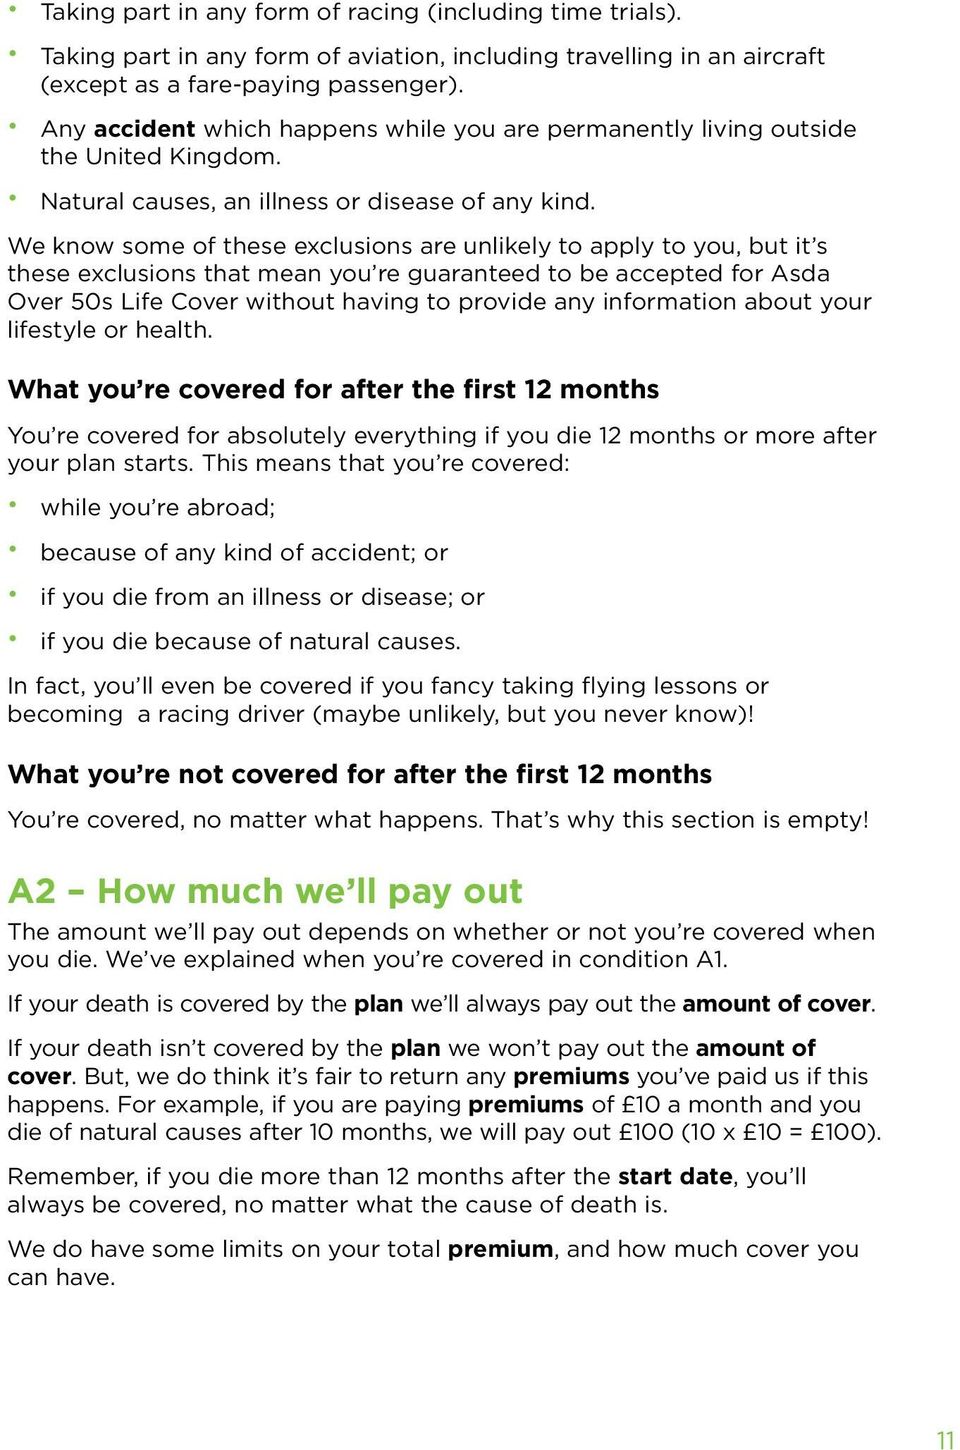 We know some of these exclusions are unlikely to apply to you, but it s these exclusions that mean you re guaranteed to be accepted for Asda Over 50s Life Cover without having to provide any